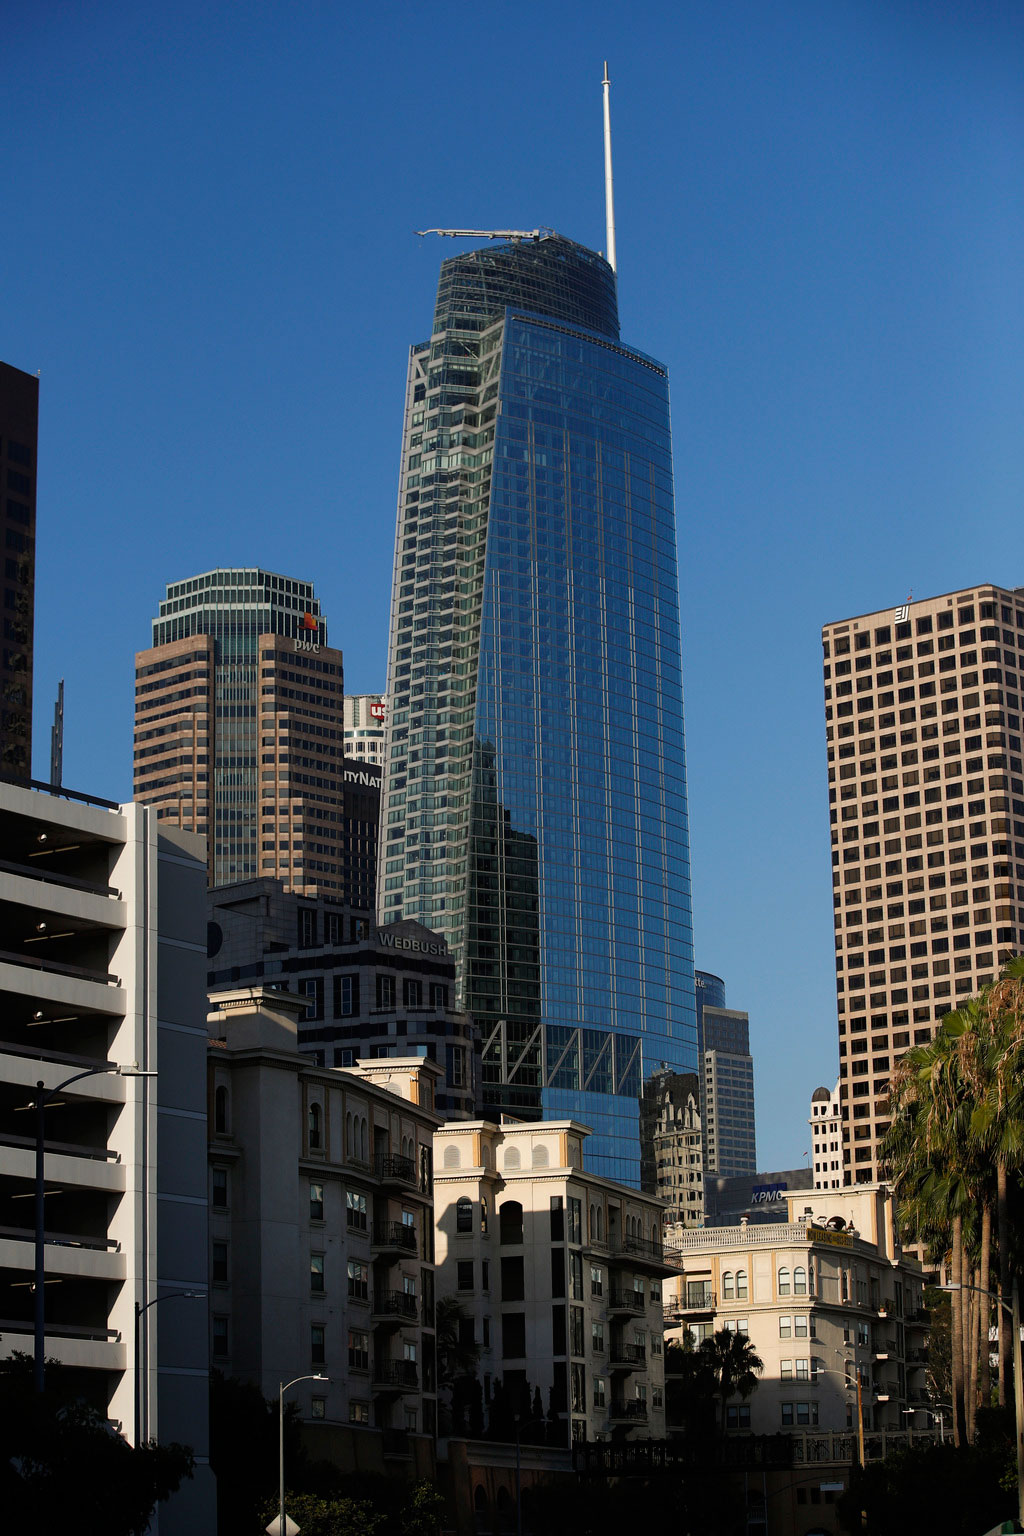 Wilshire Grand Center What Are the Best Looking Skyscrapers in Los Angeles?